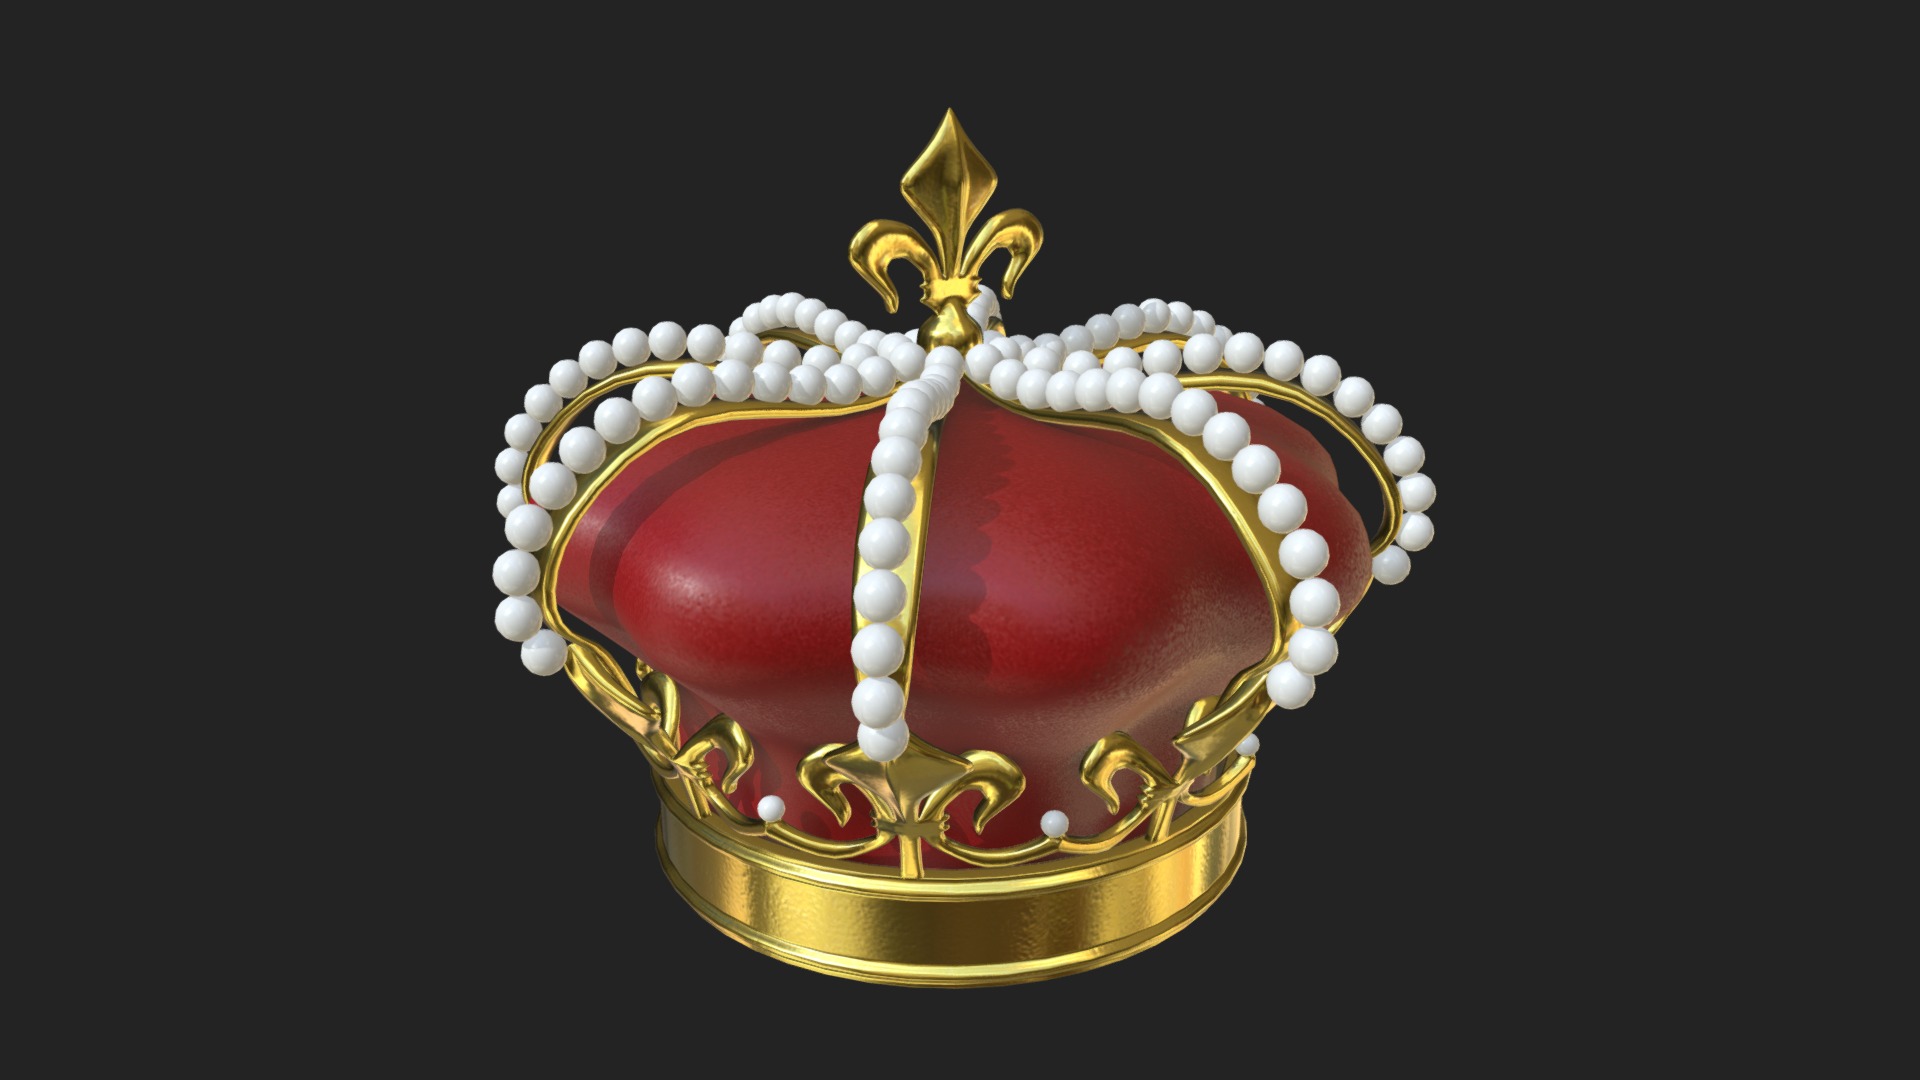 3D model Royal crown - This is a 3D model of the Royal crown. The 3D model is about a crown with a red and gold design.